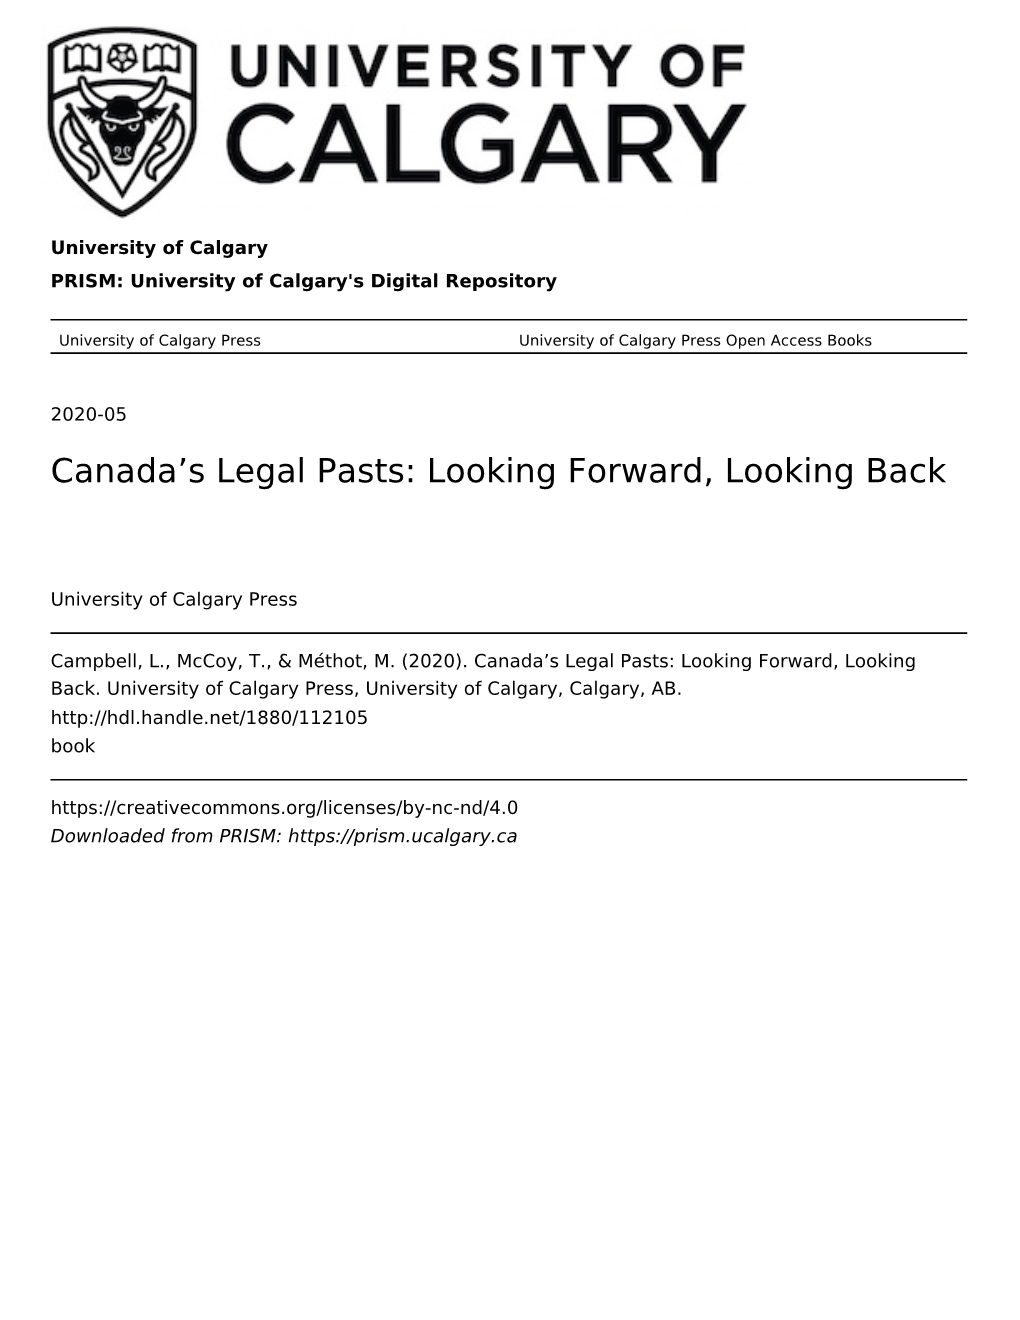 Canada's Legal Pasts: Looking Forward, Looking Back